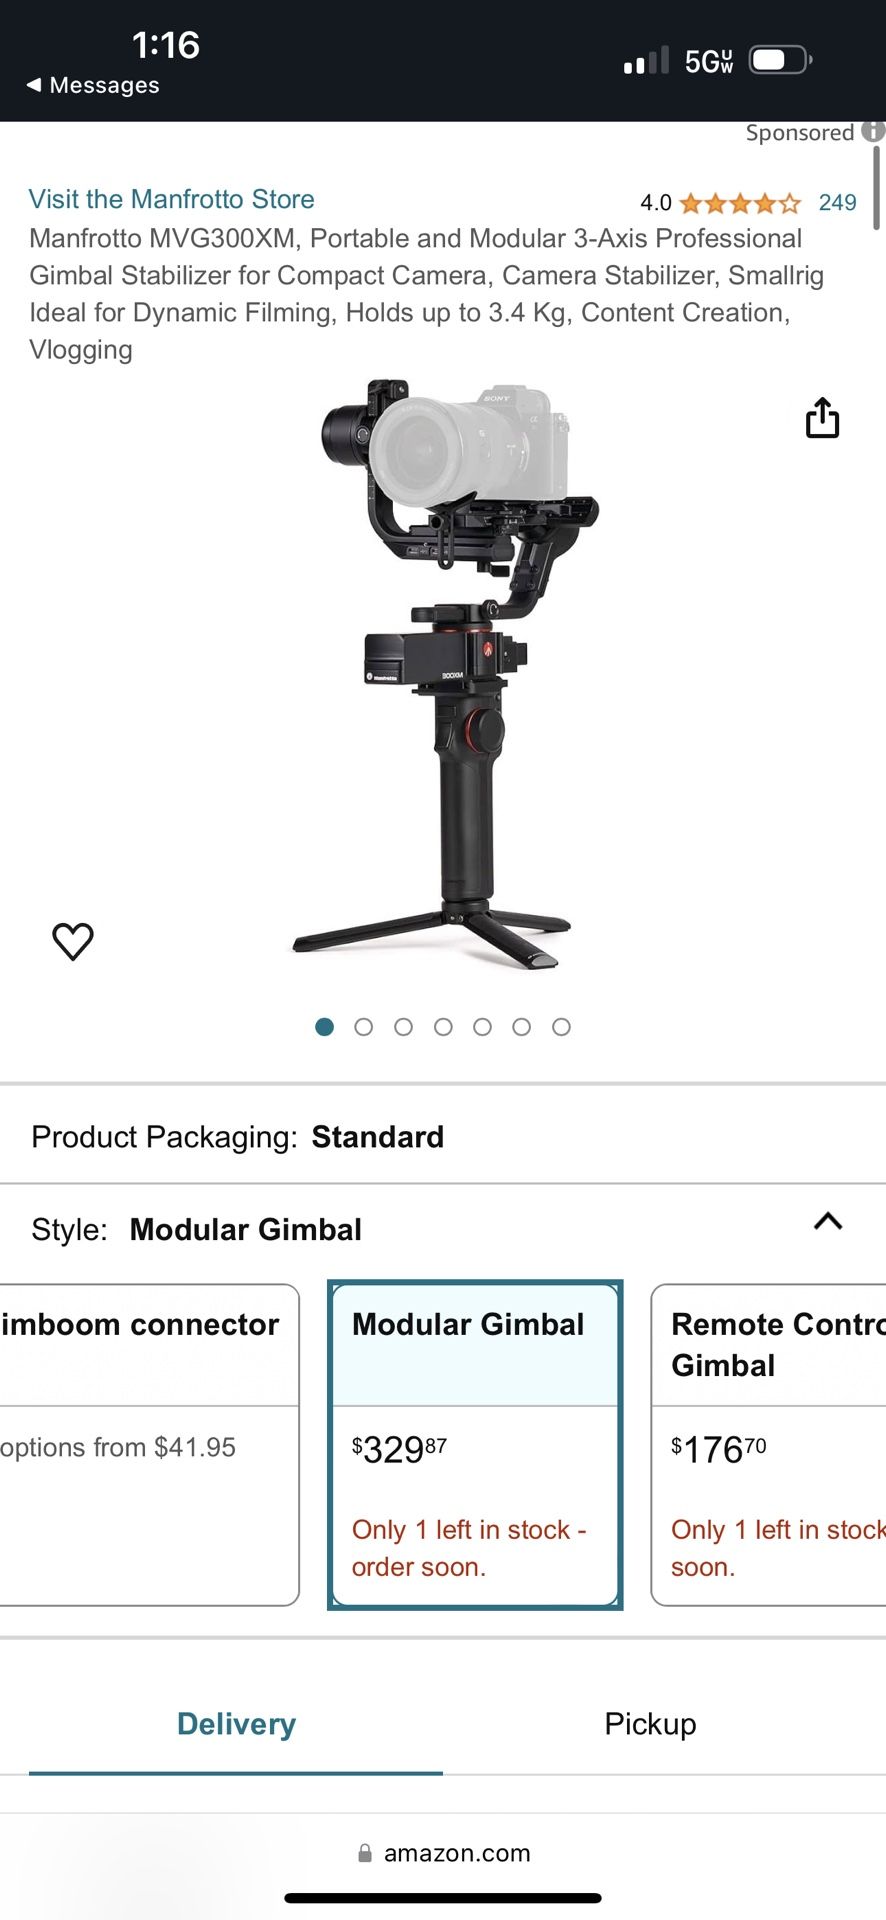 Brand New Gimbal Manfrotto